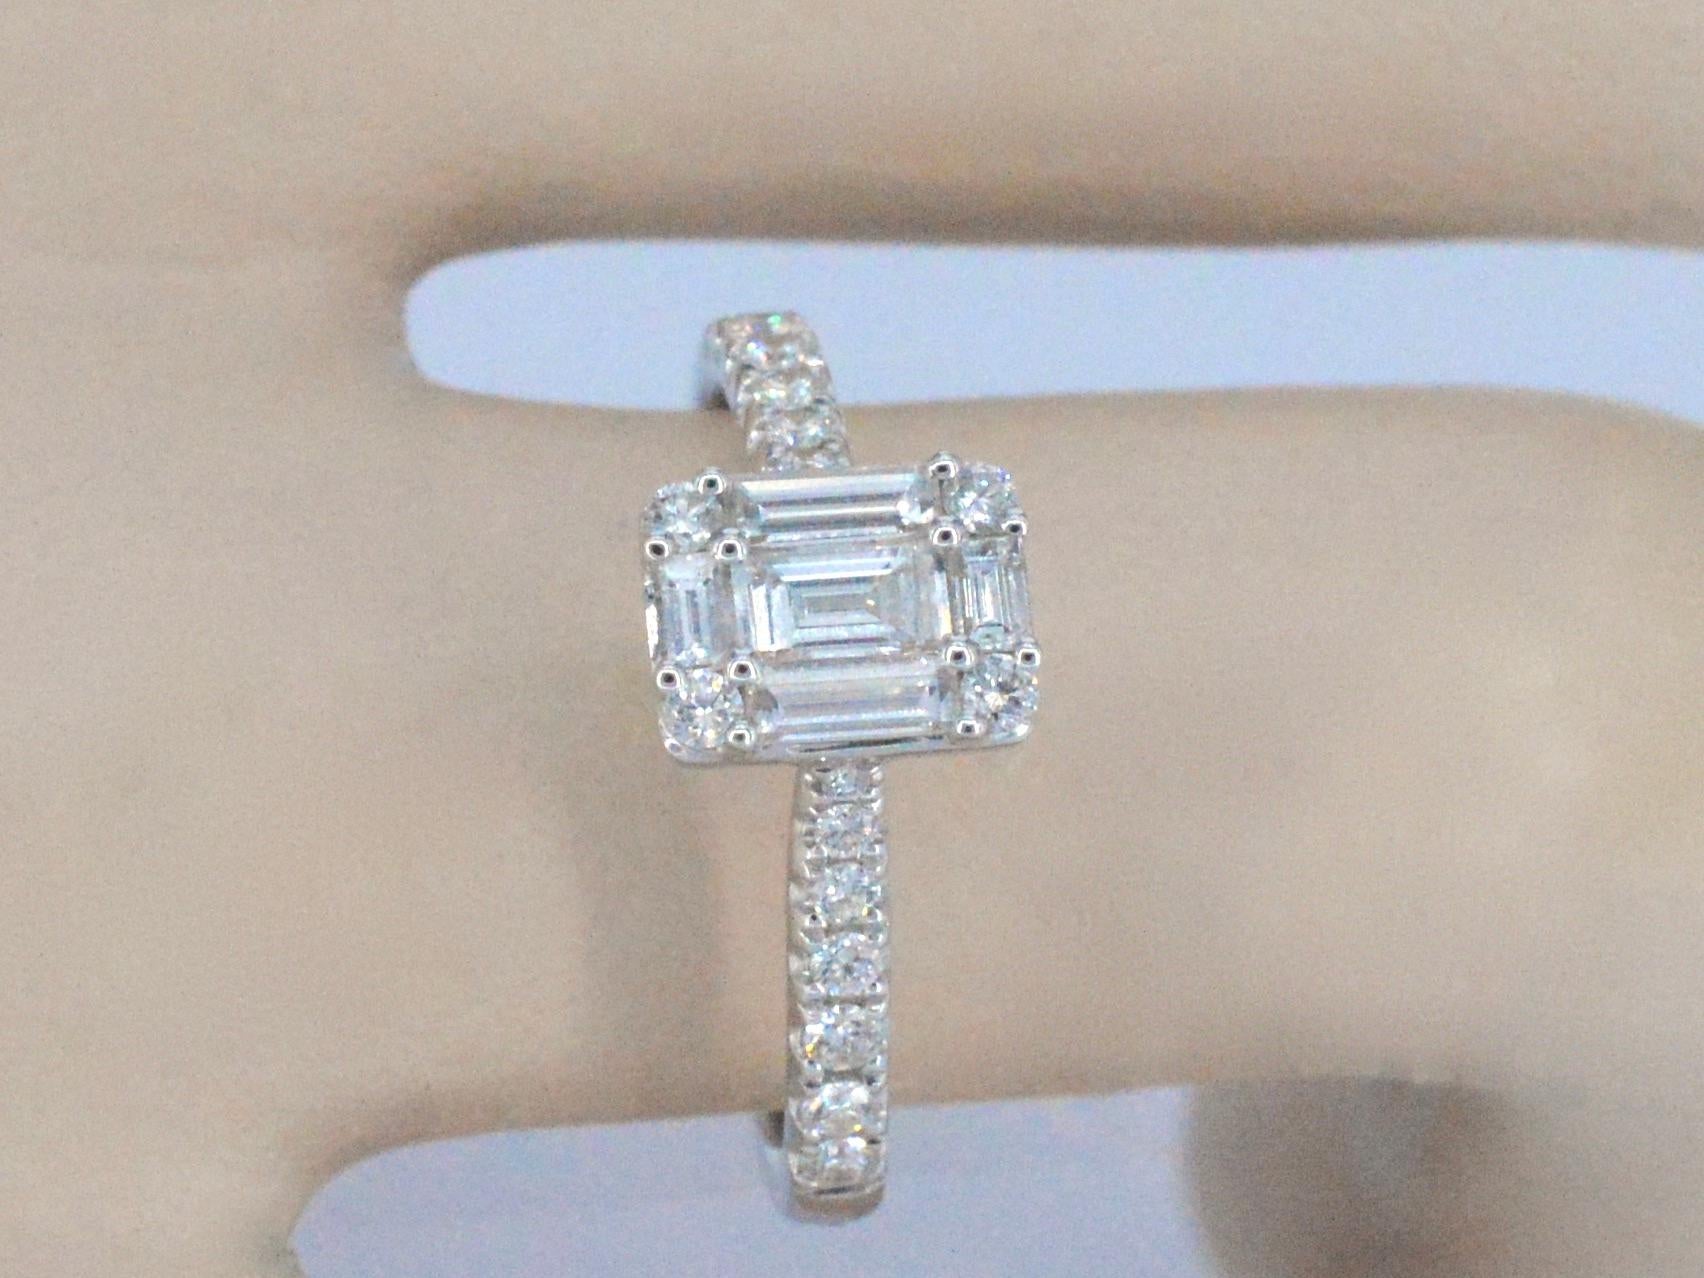 Introducing an exquisite piece of jewelry featuring naturally shiny diamonds. With a total diamond weight of 0.90 carats, this item showcases a blend of Brilliant and Baguette cuts, offering a captivating sparkle. The diamonds are graded with a